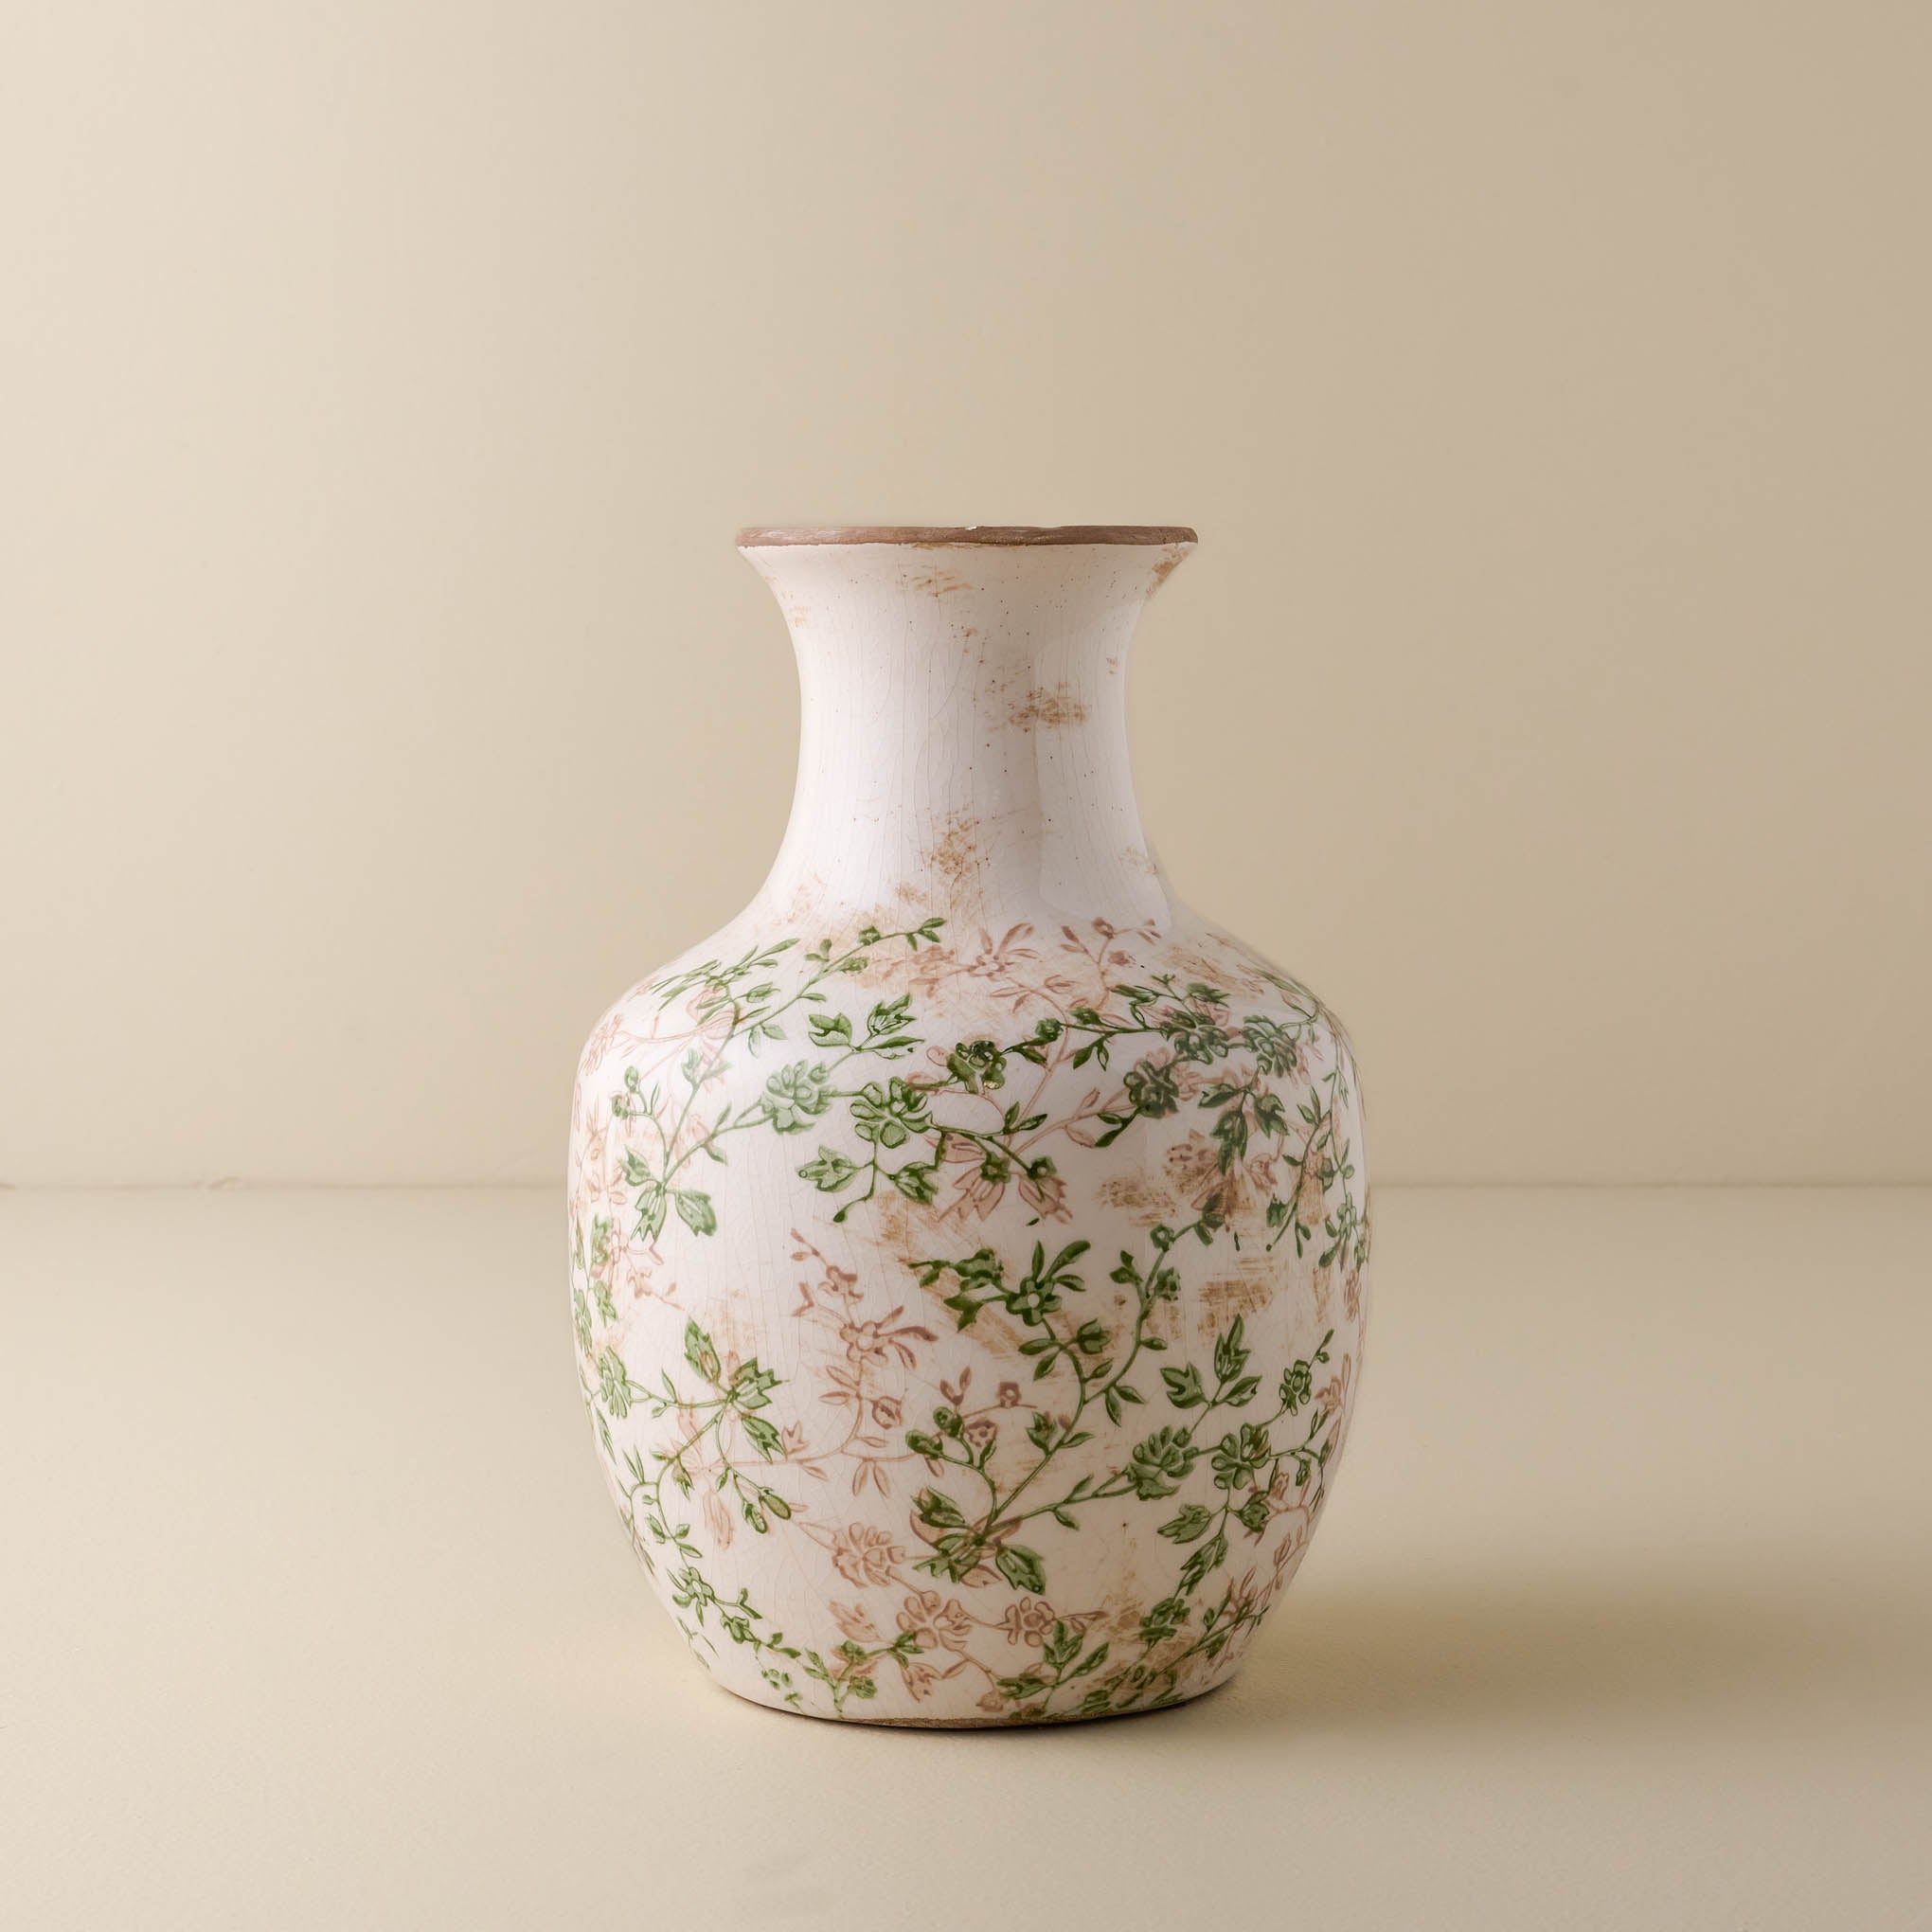 Green and White Distressed Vase with Long Neck $48.00